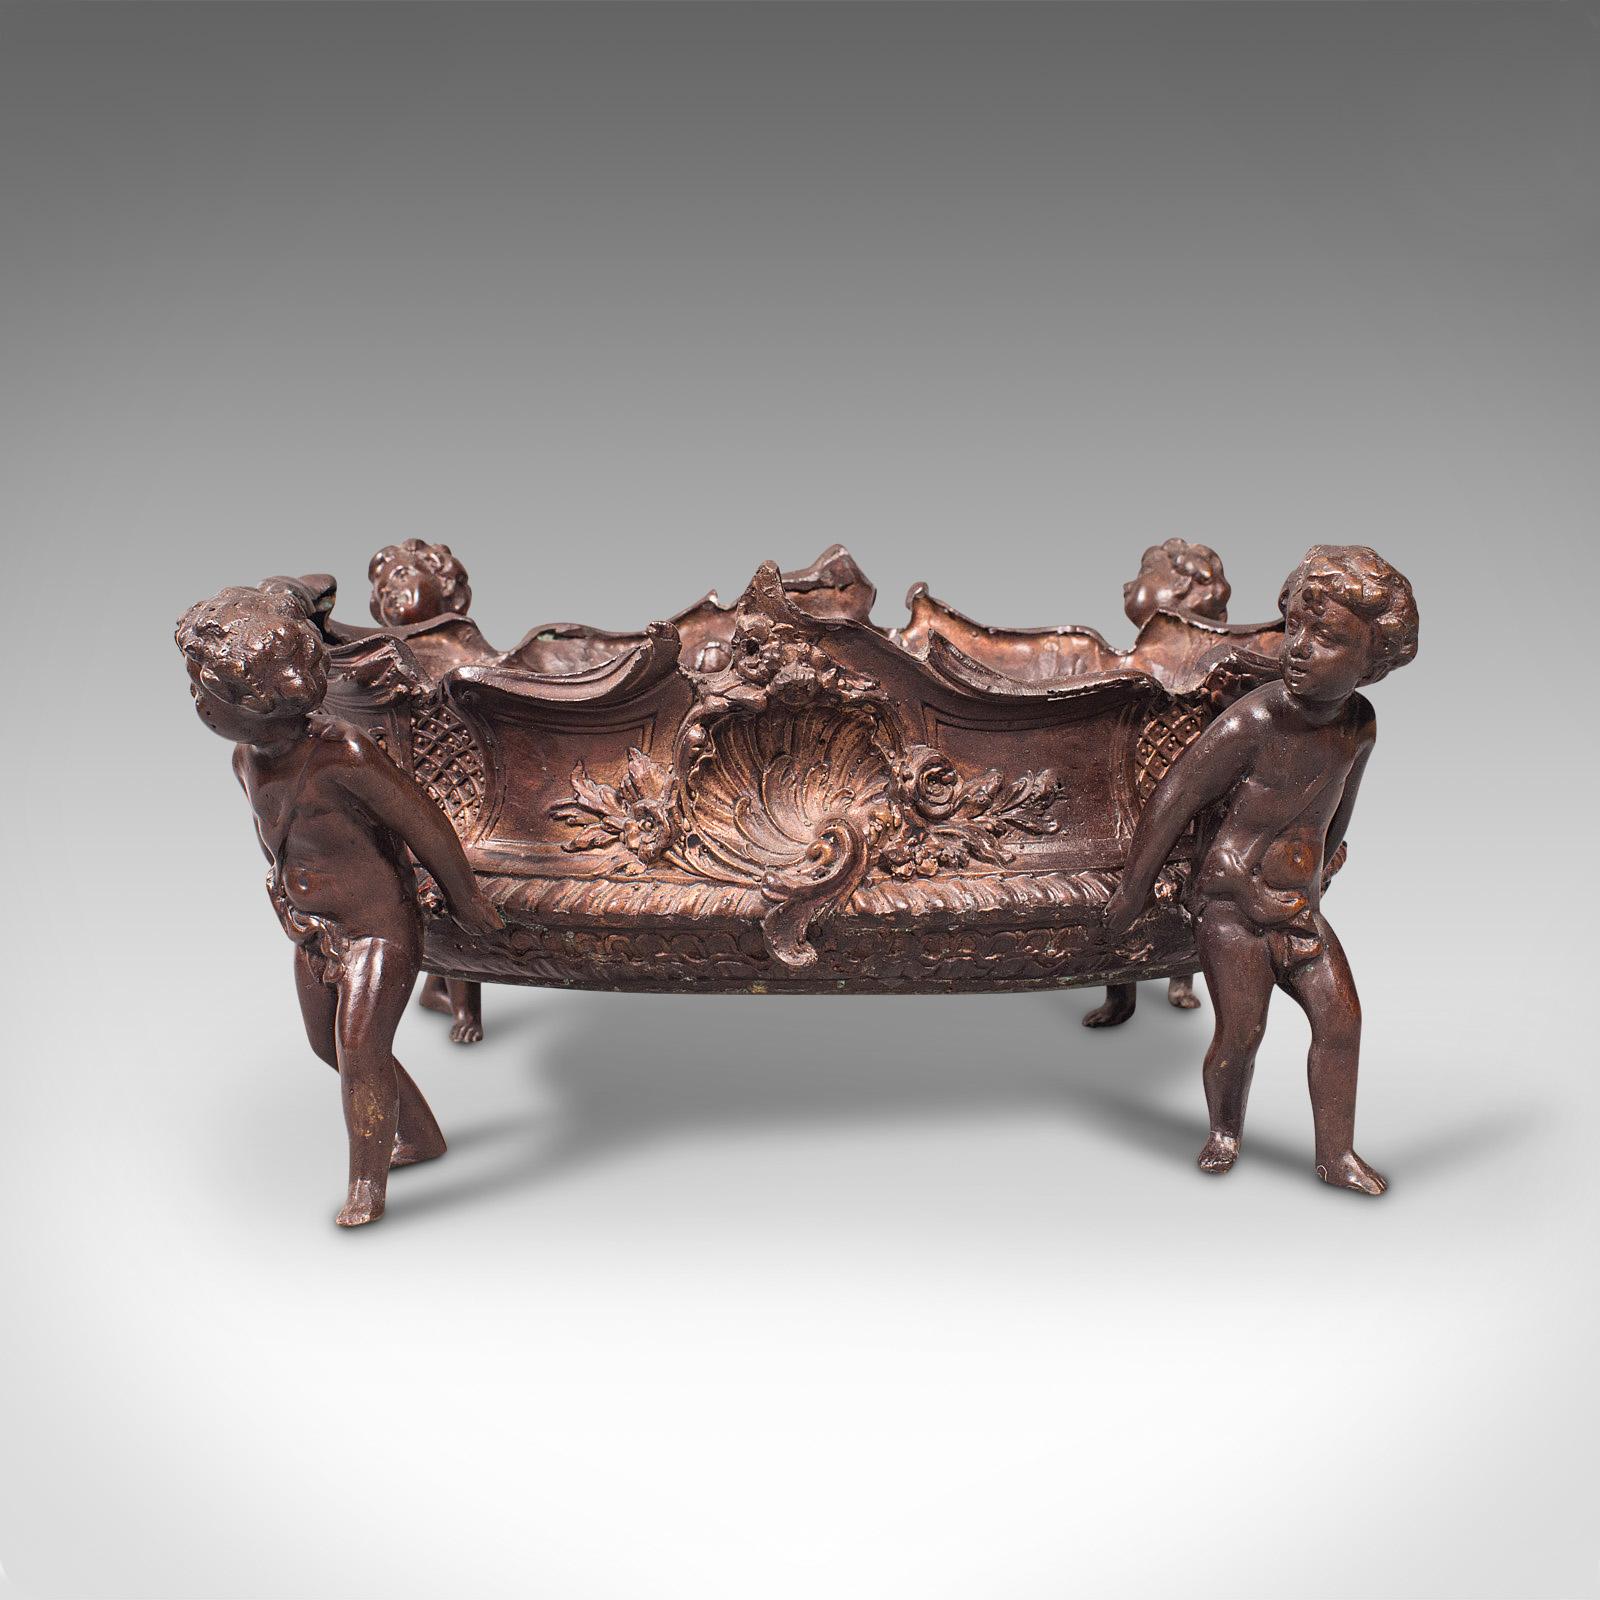 This is an antique decorative jardiniere. An Italian, bronze planter or fruit serving bowl with Putto legs, dating to the late Victorian period, circa 1900.

Delightful Italianate taste and cherubic interest
Displays a desirable aged patina and